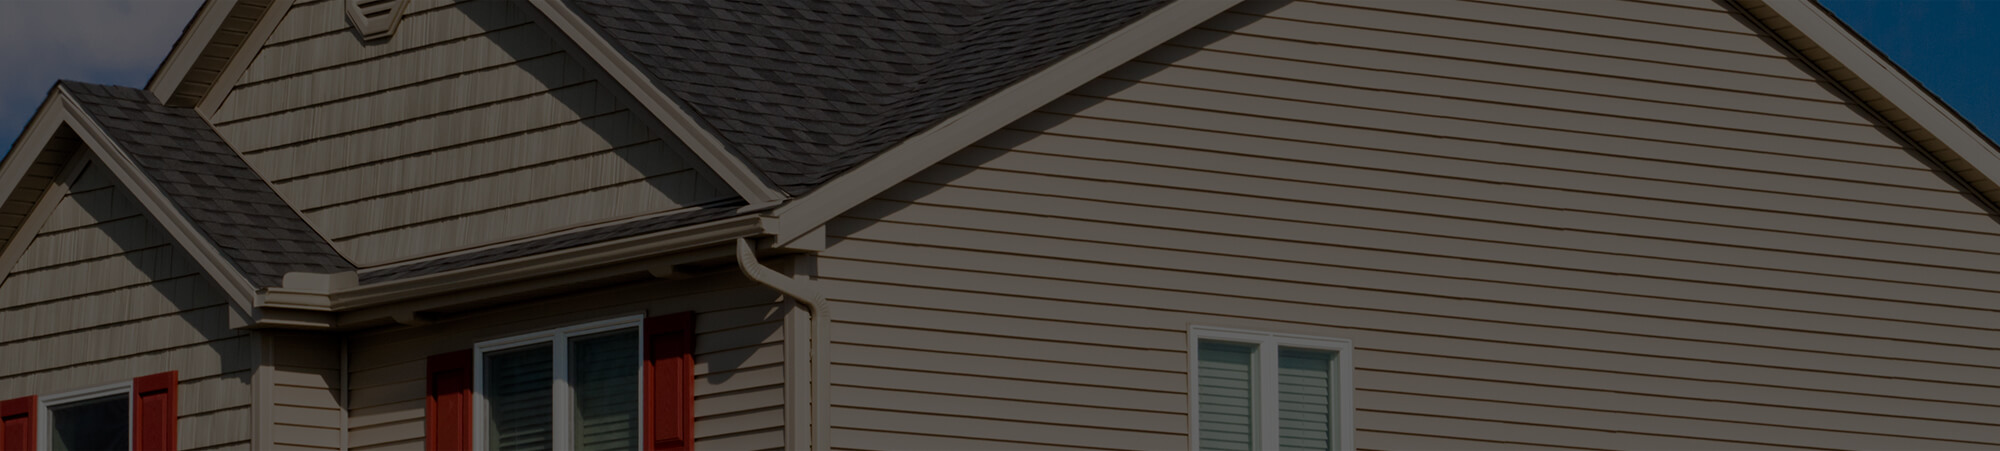 siding installation and replacement services in De pere wi